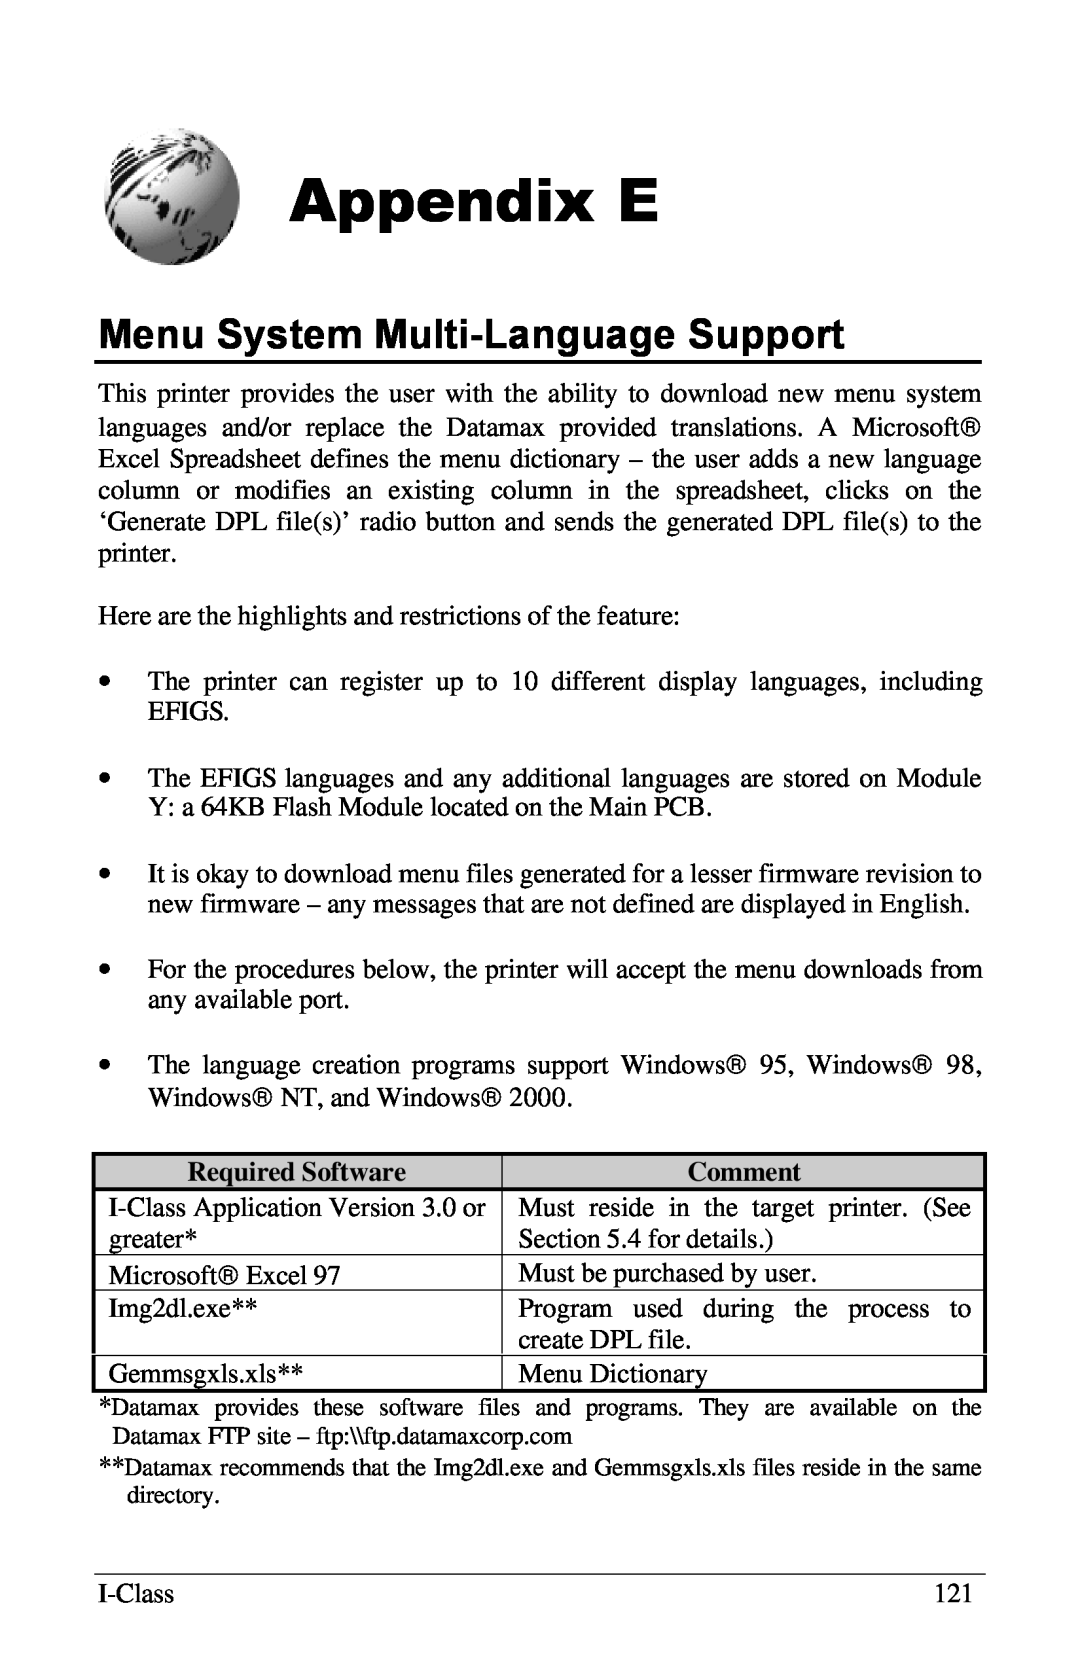 Xerox I Class manual Appendix E, Menu System Multi-LanguageSupport, Required Software, Comment 